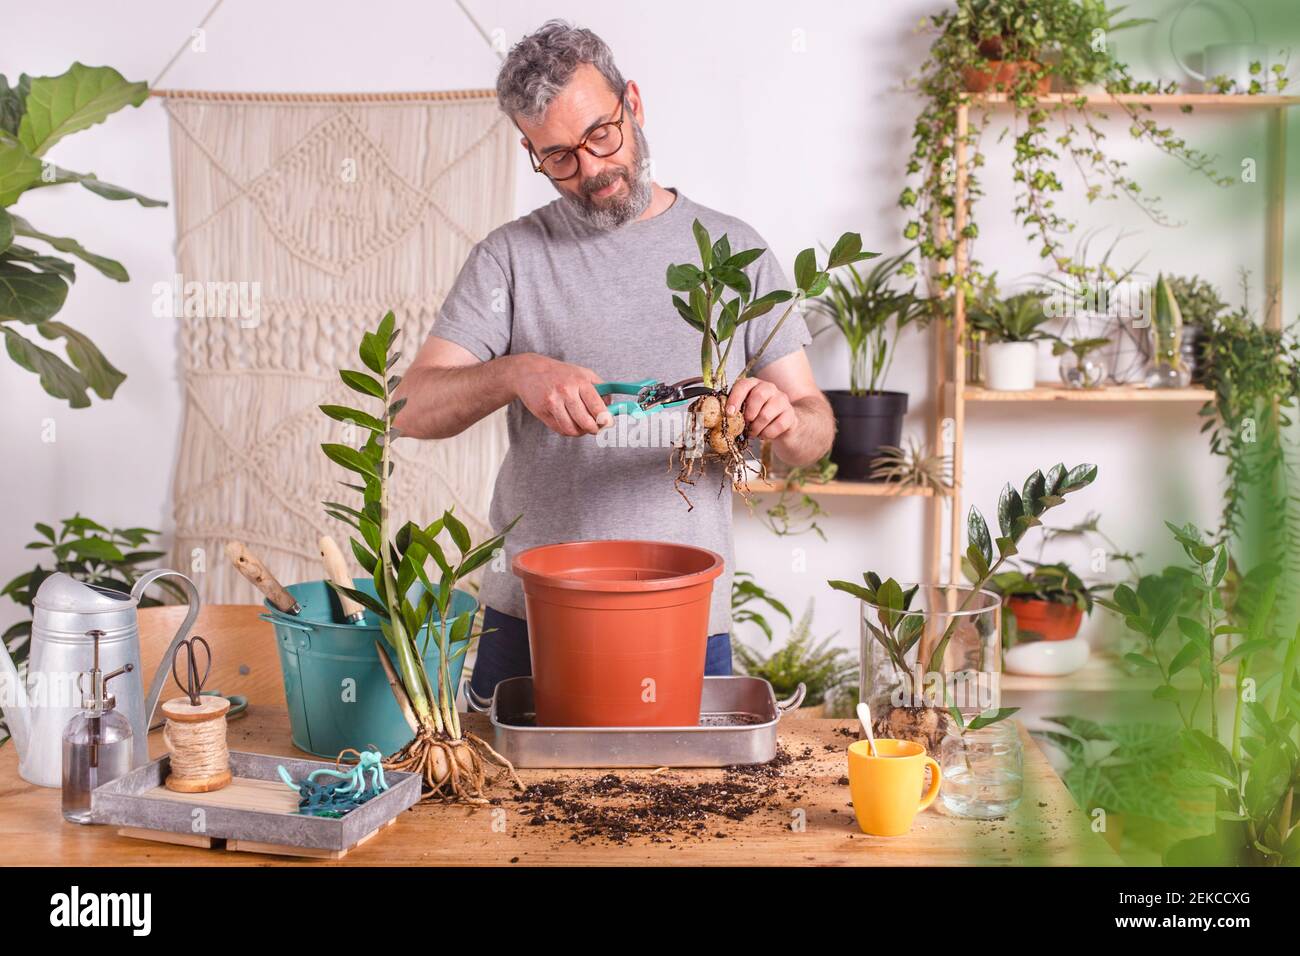 Mature man cutting roots of Zamioculcas Zamiifolia plant with pruning shears while standing at home Stock Photo